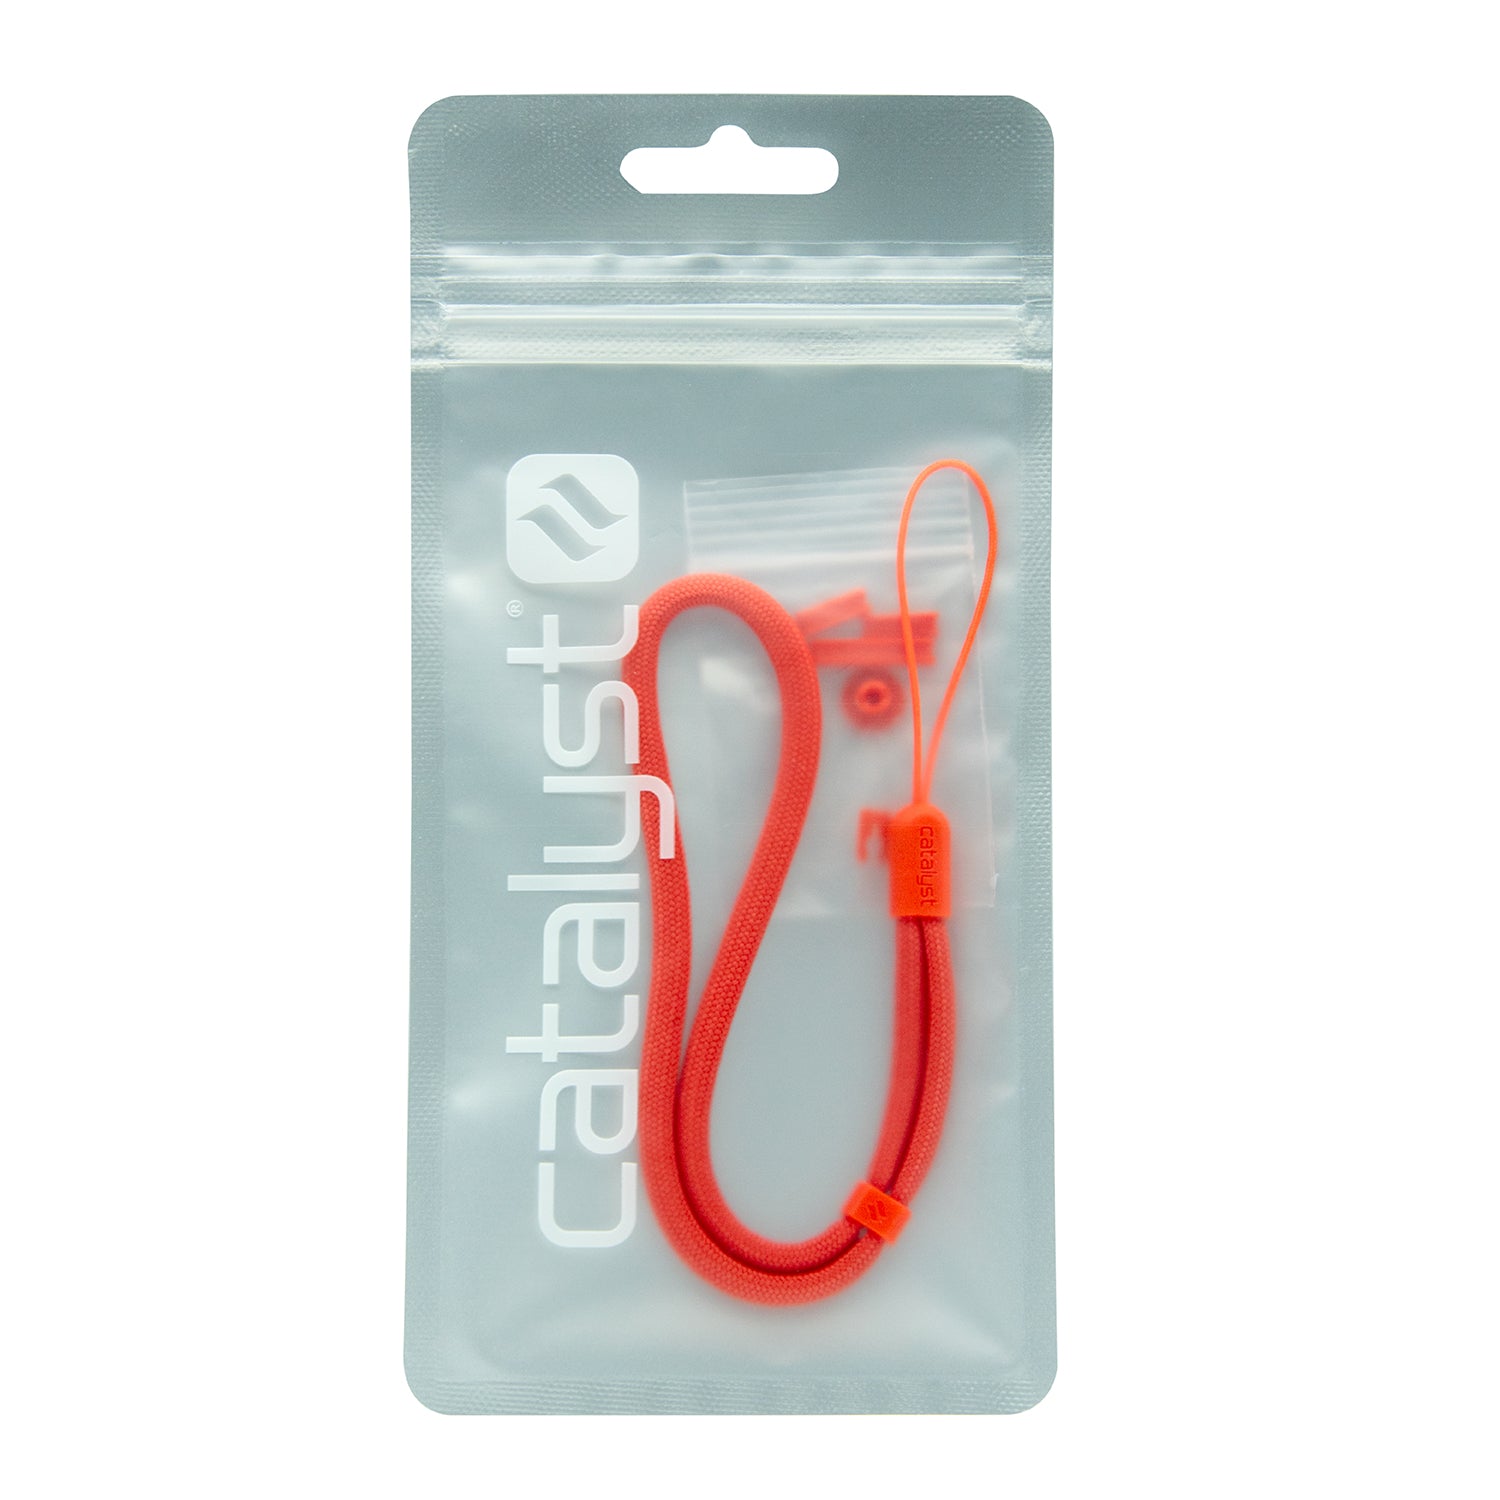 catalyst colored lanyard & buttons orange inside the packaging